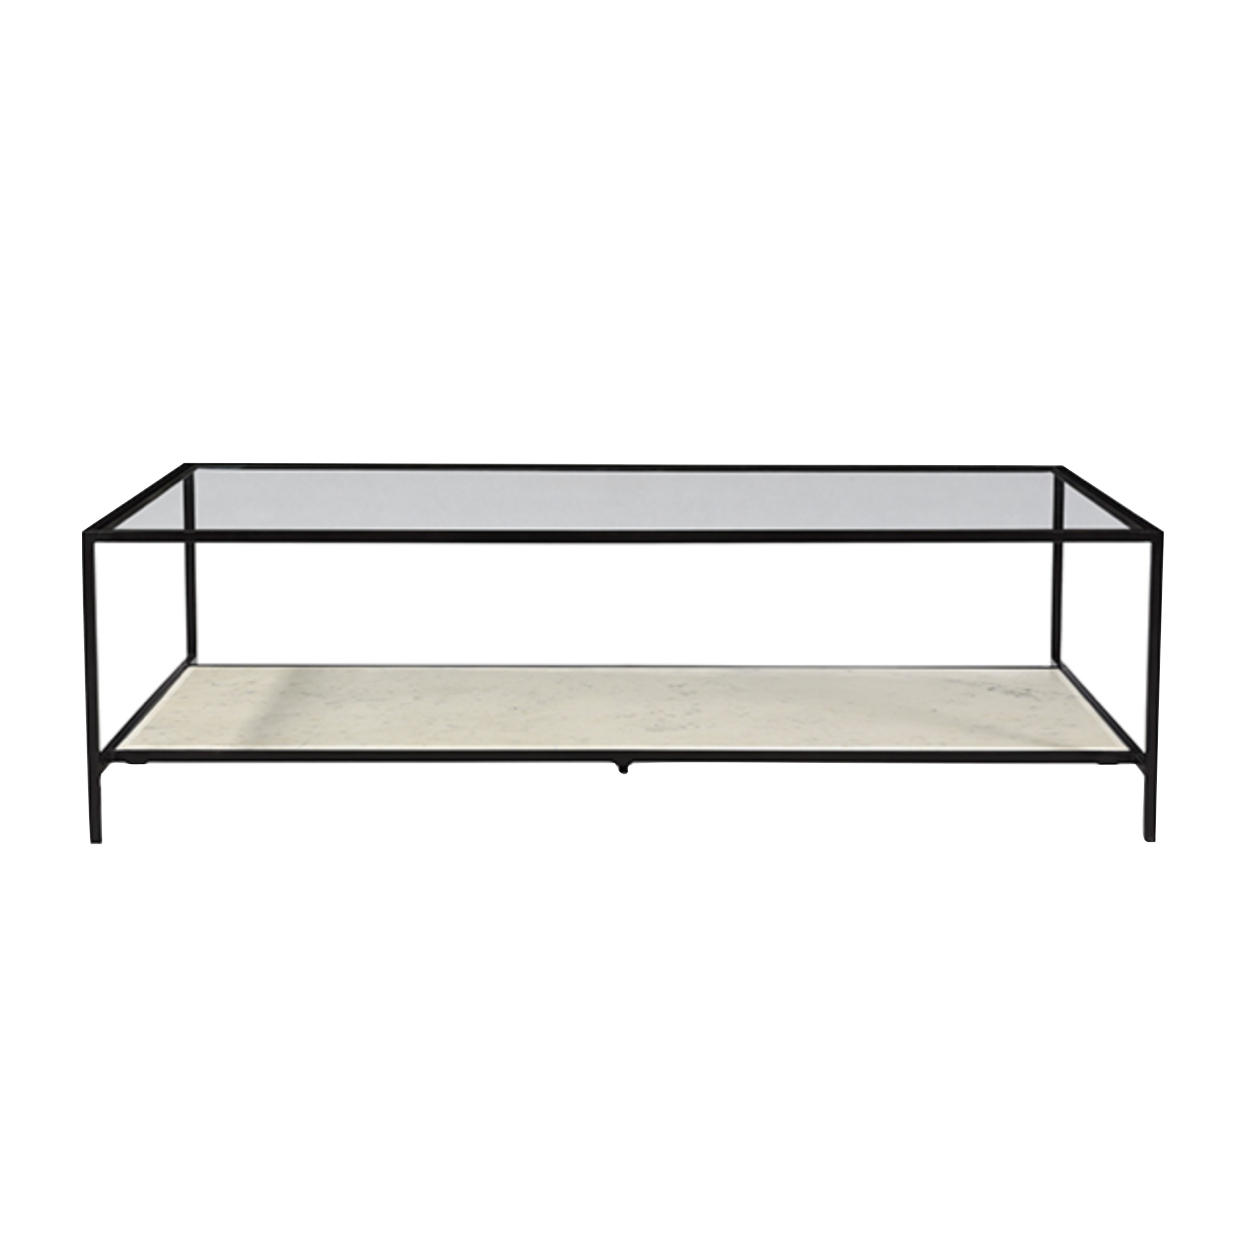 The Ramos Coffee Table is a chic addition to any room with a glass top, gun metal black finish, and marble bottom shelf.  WHITE MARBLE IRON AND GLASS GUN METAL IRON FINISH Size: 52"l x 28"d x 15"h